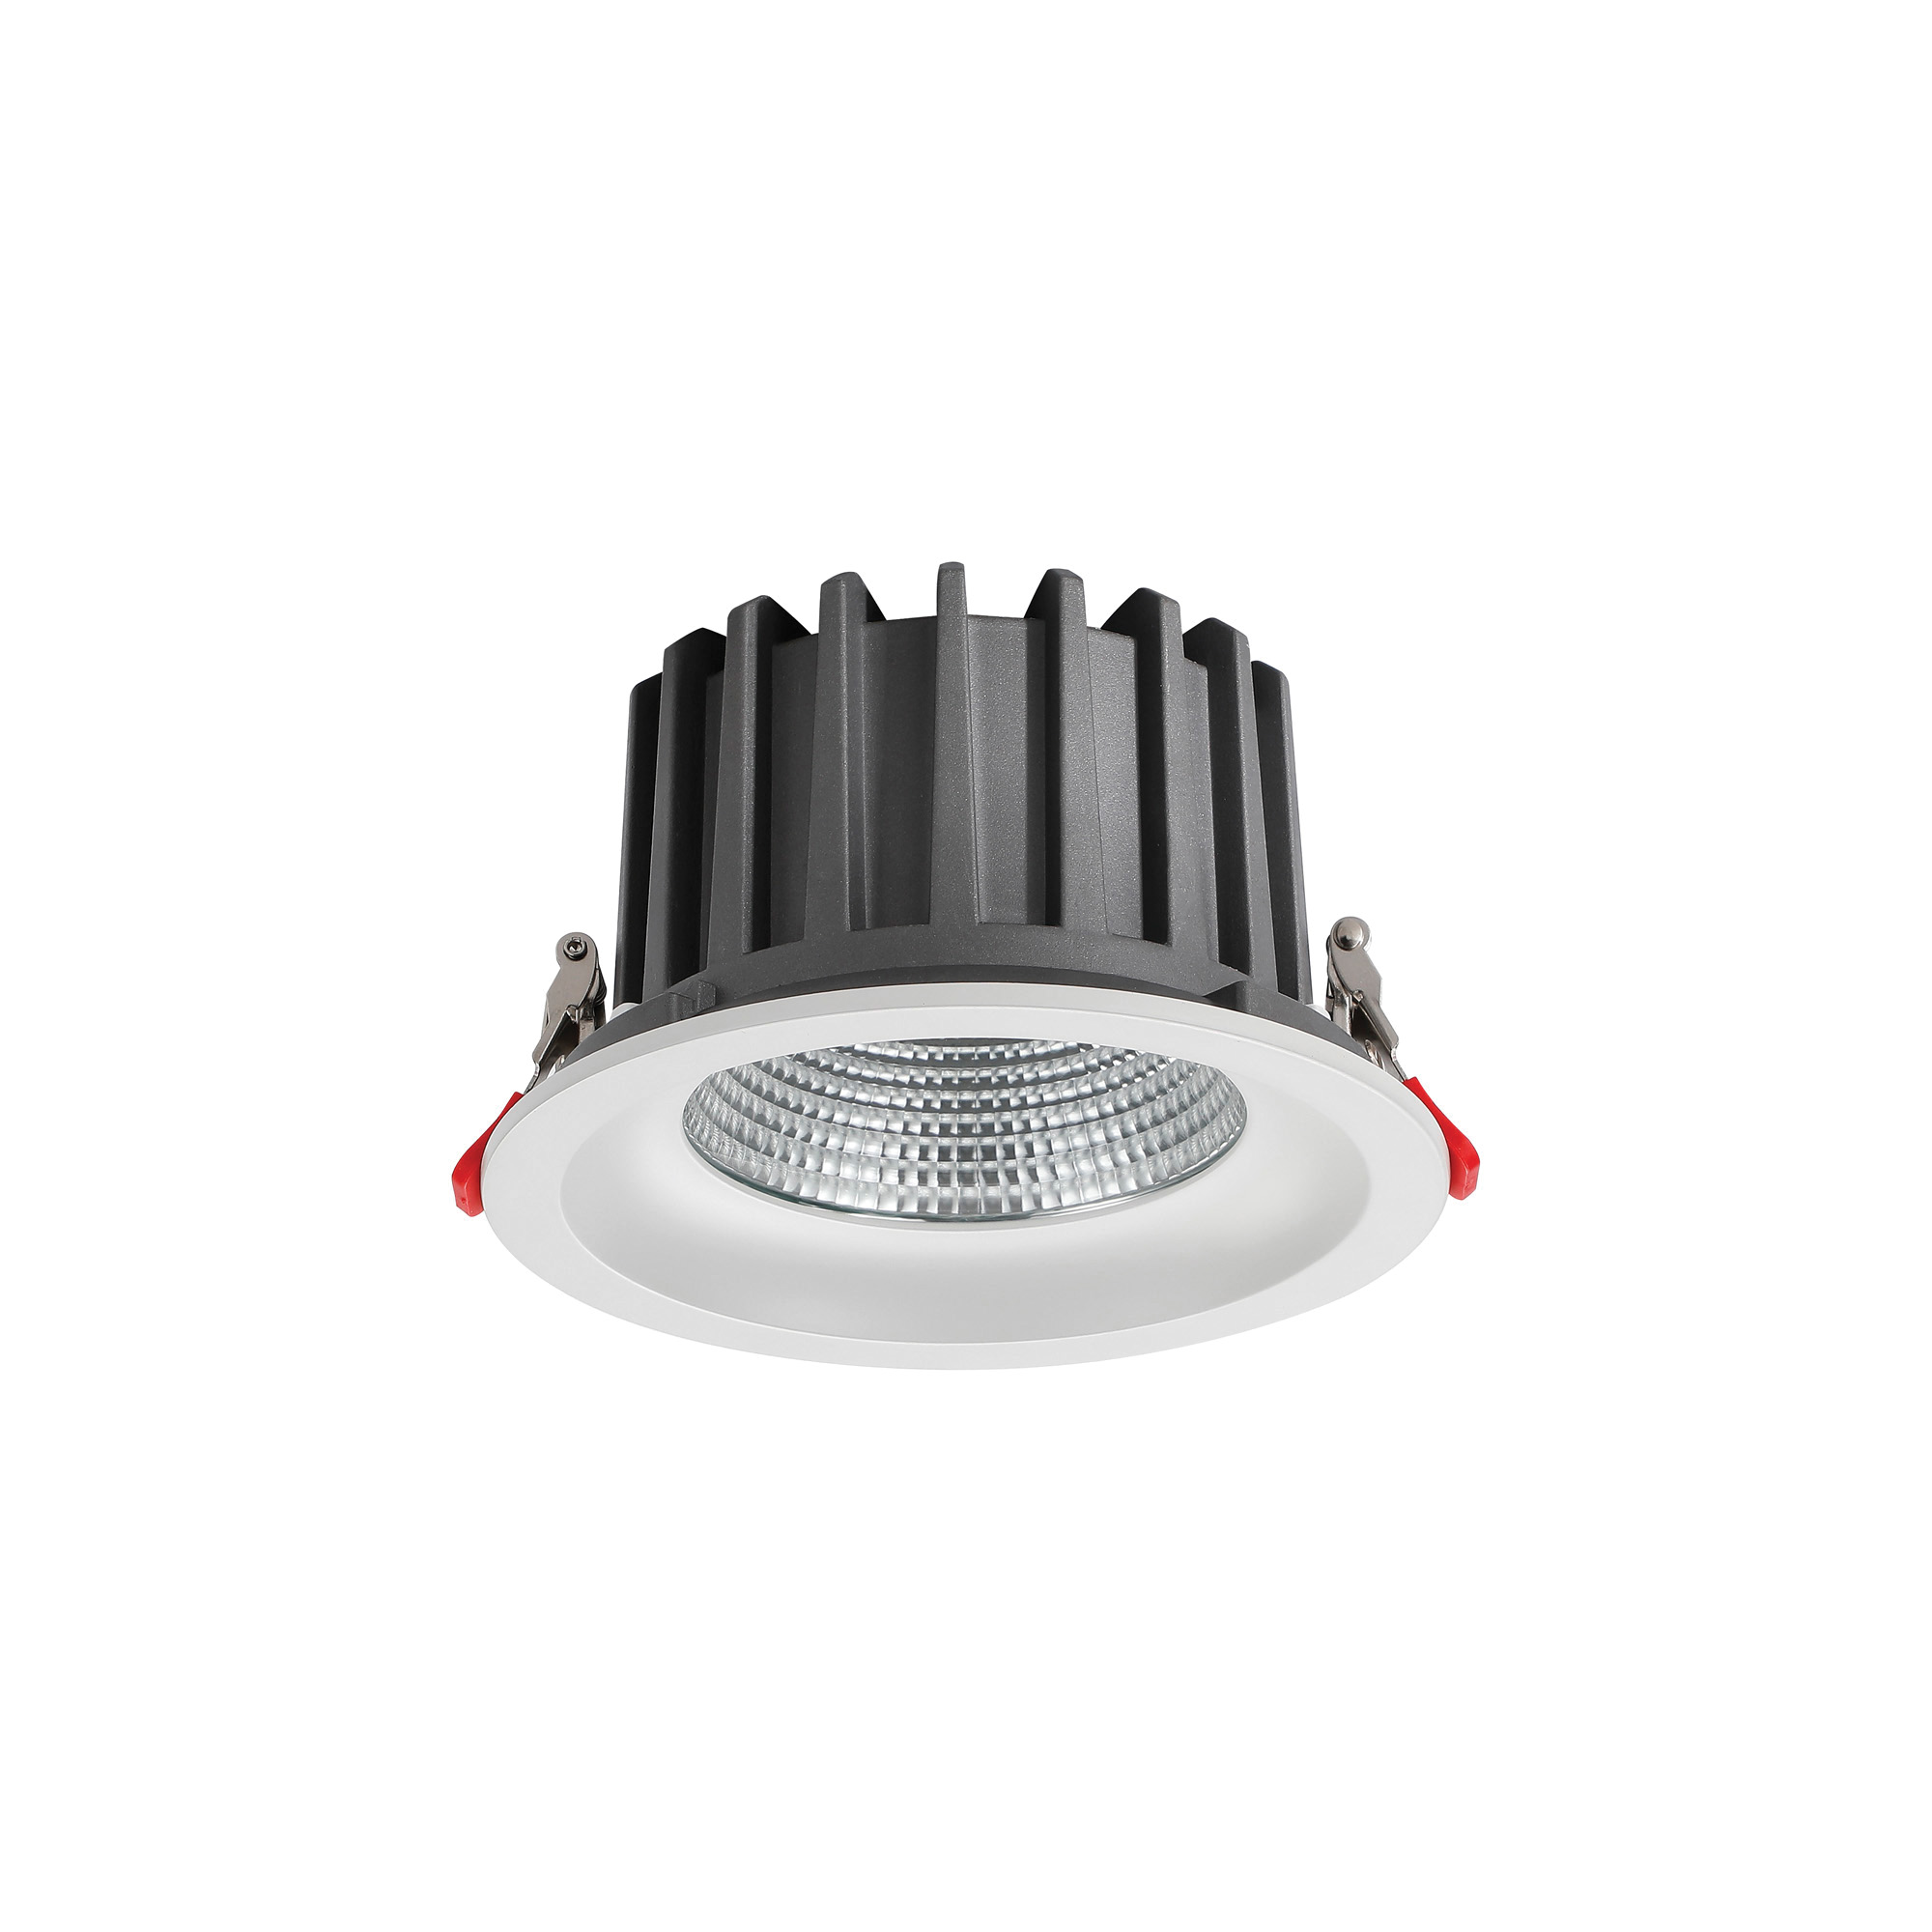 DL200058  Bionic 24, 24W, 700mA, White Deep Round Recessed Downlight, 1920lm ,Cut Out 155mm, 42° , 3000K, IP44, DRIVER INC., 5yrs Warranty.